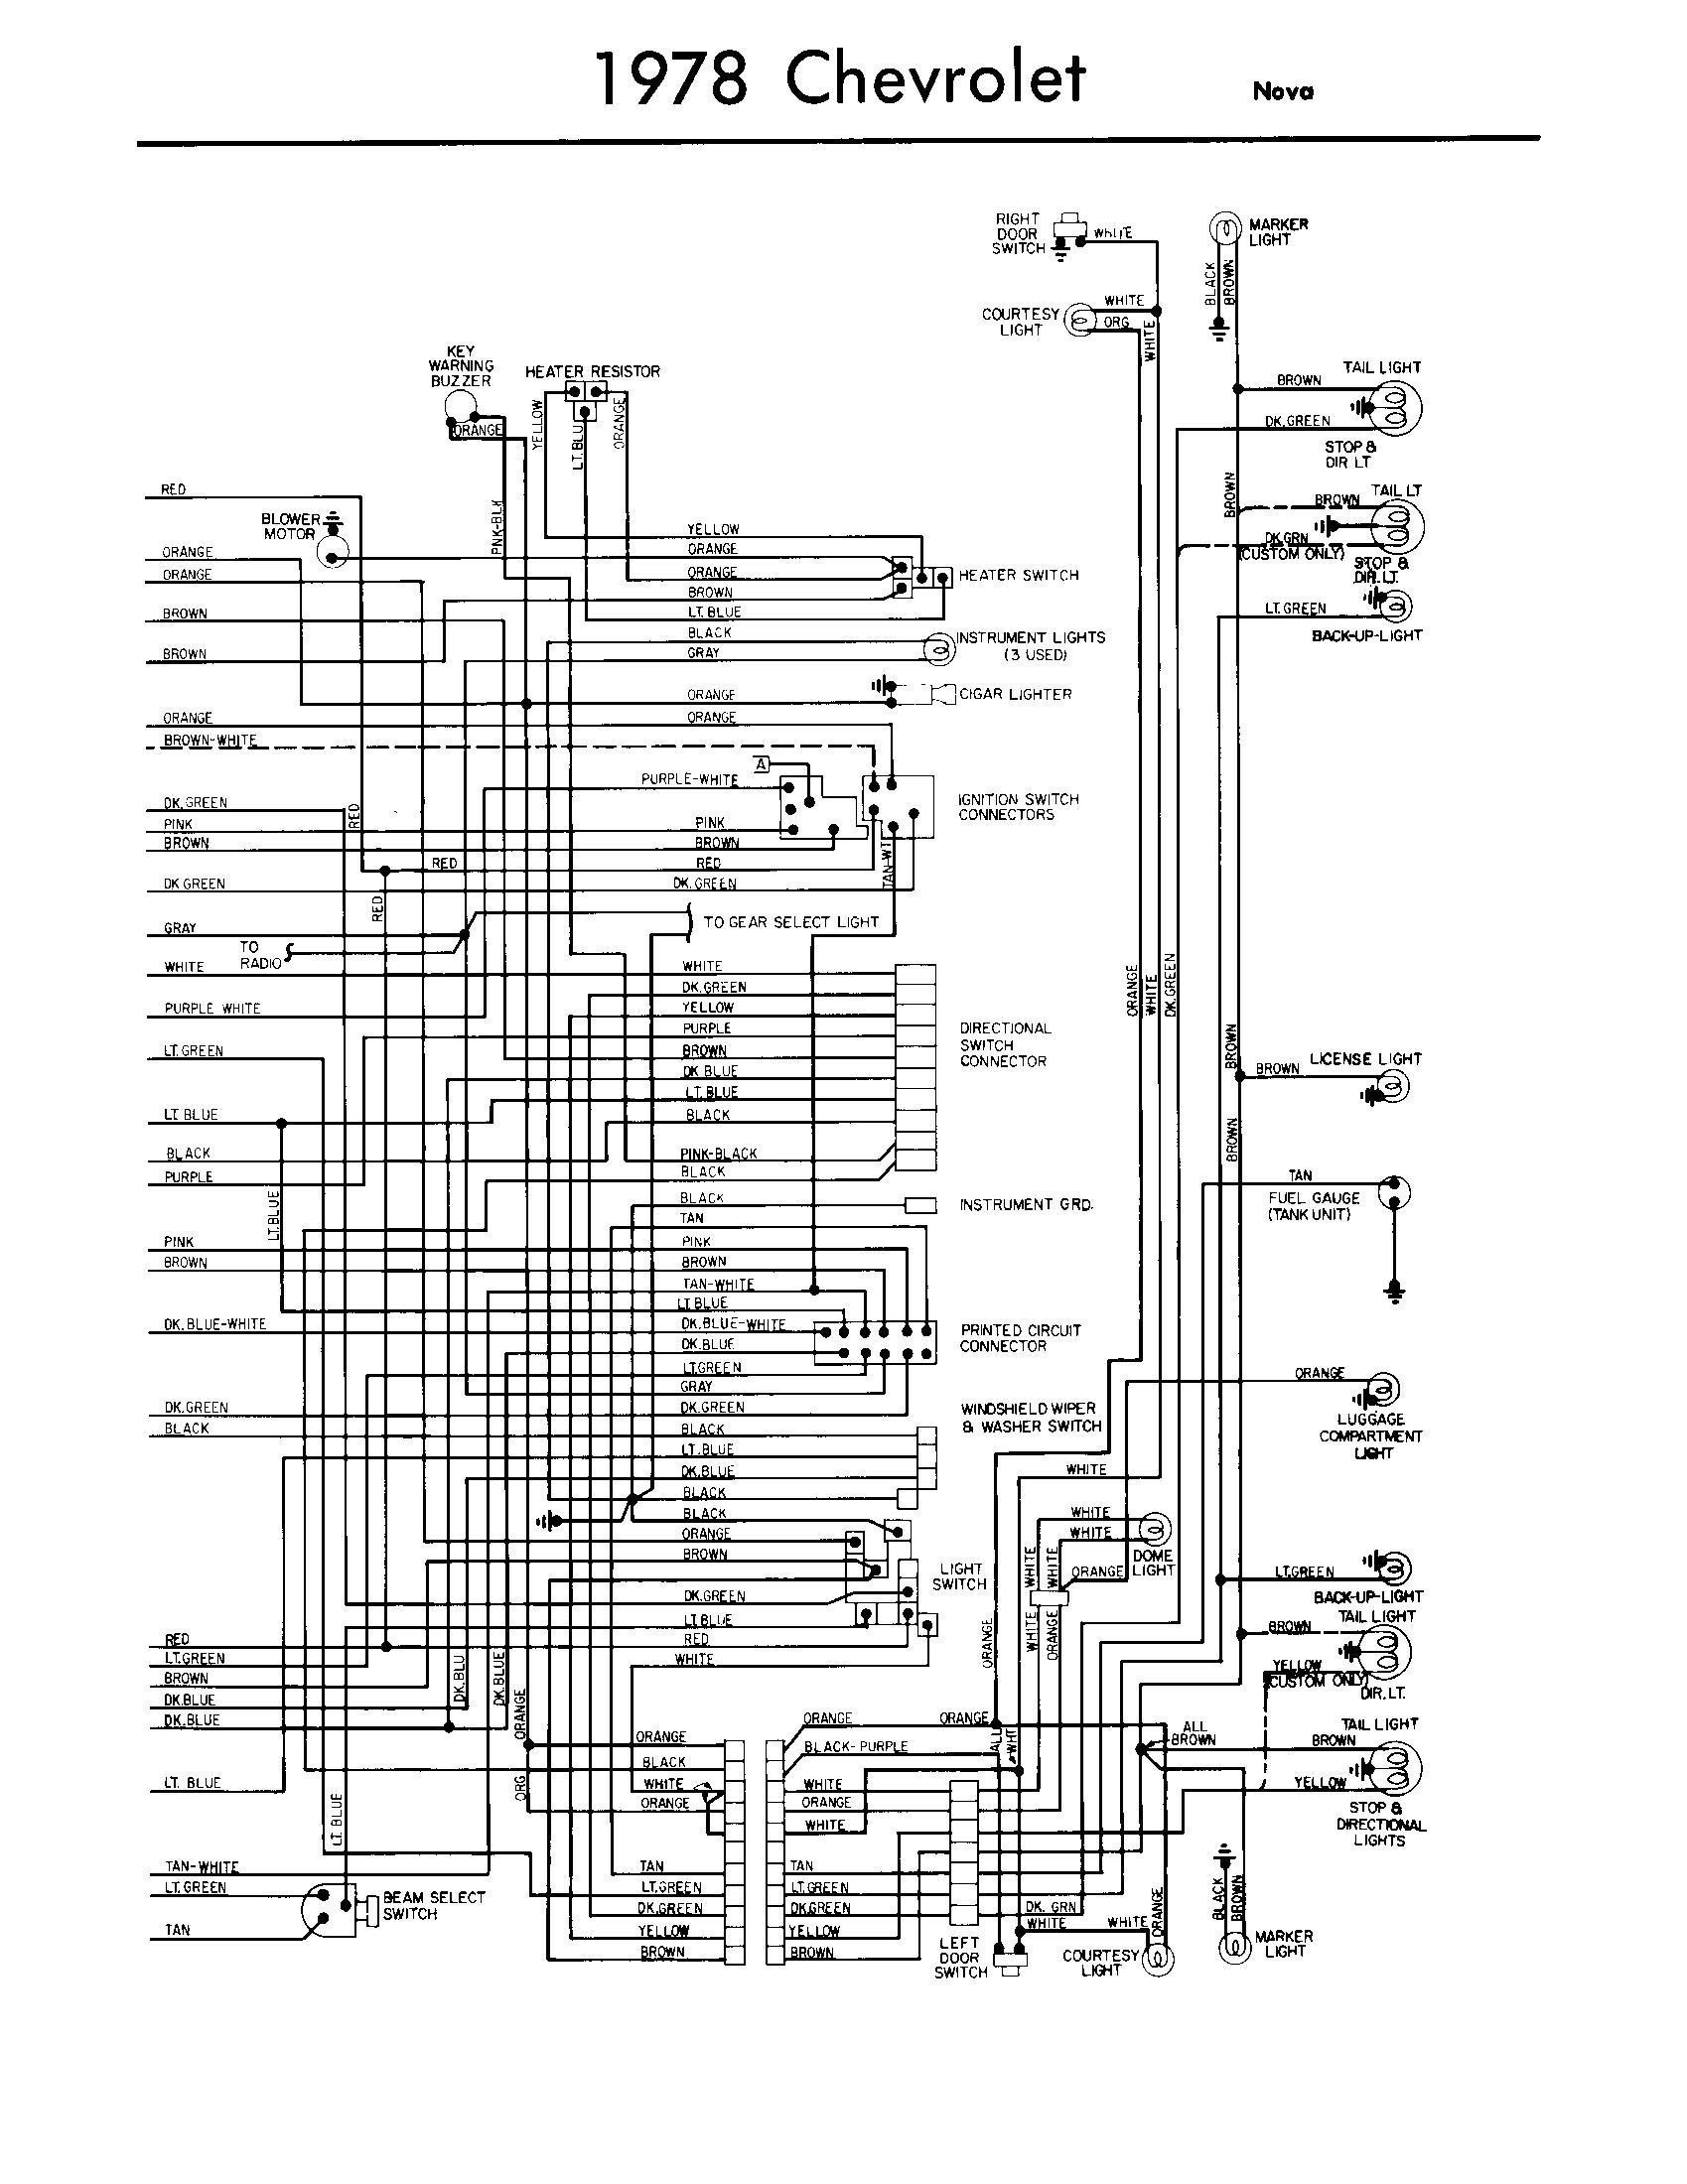 Chevy Truck Fuse Box Diagram Truck Wiring Diagram Moreover 1981 Chevy Truck Fuse Box Wiring Of Chevy Truck Fuse Box Diagram